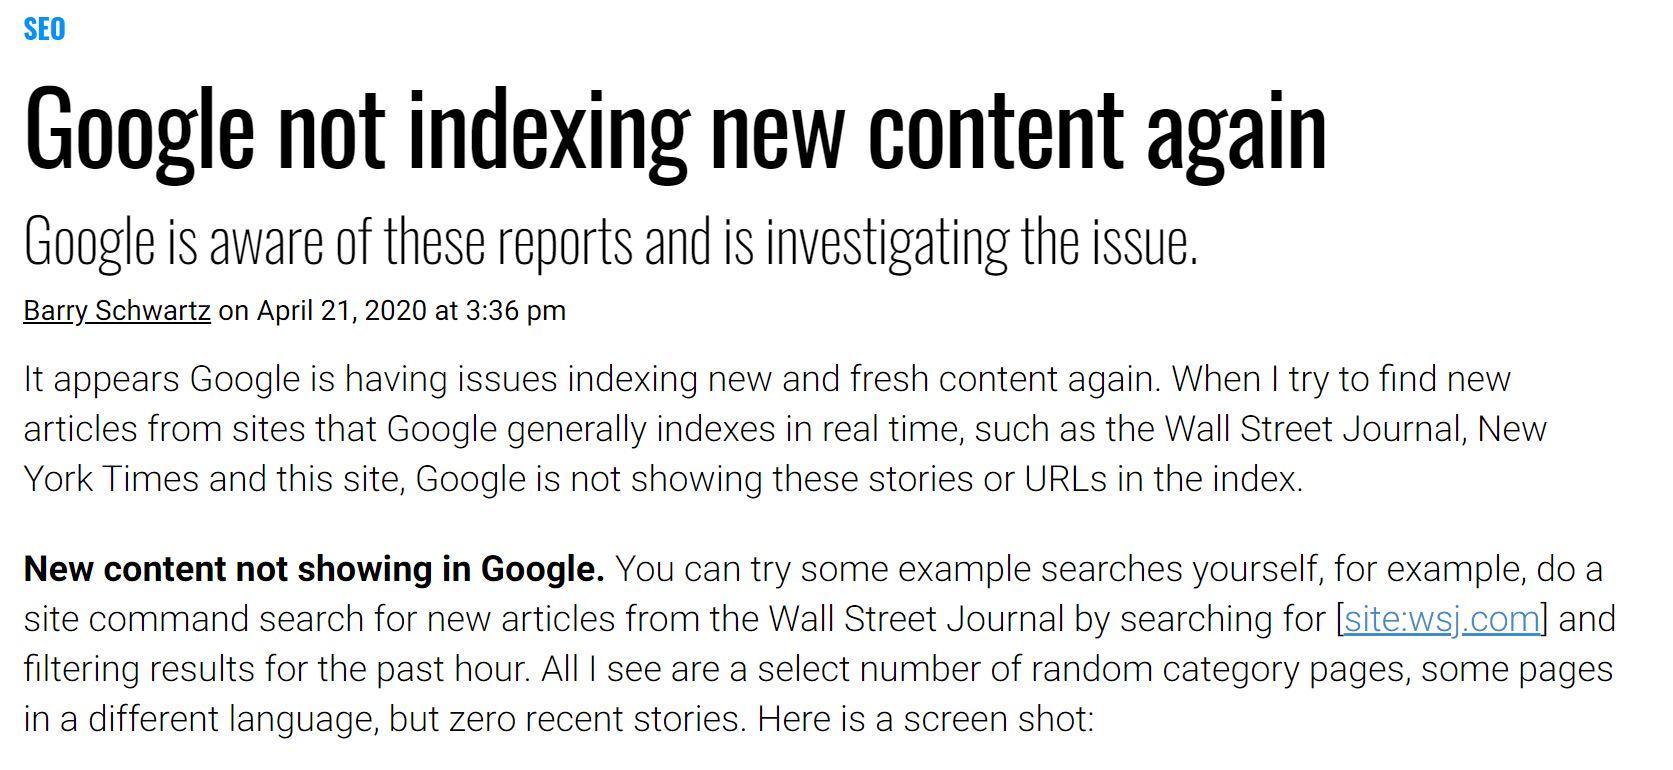 Google not indexing new content image